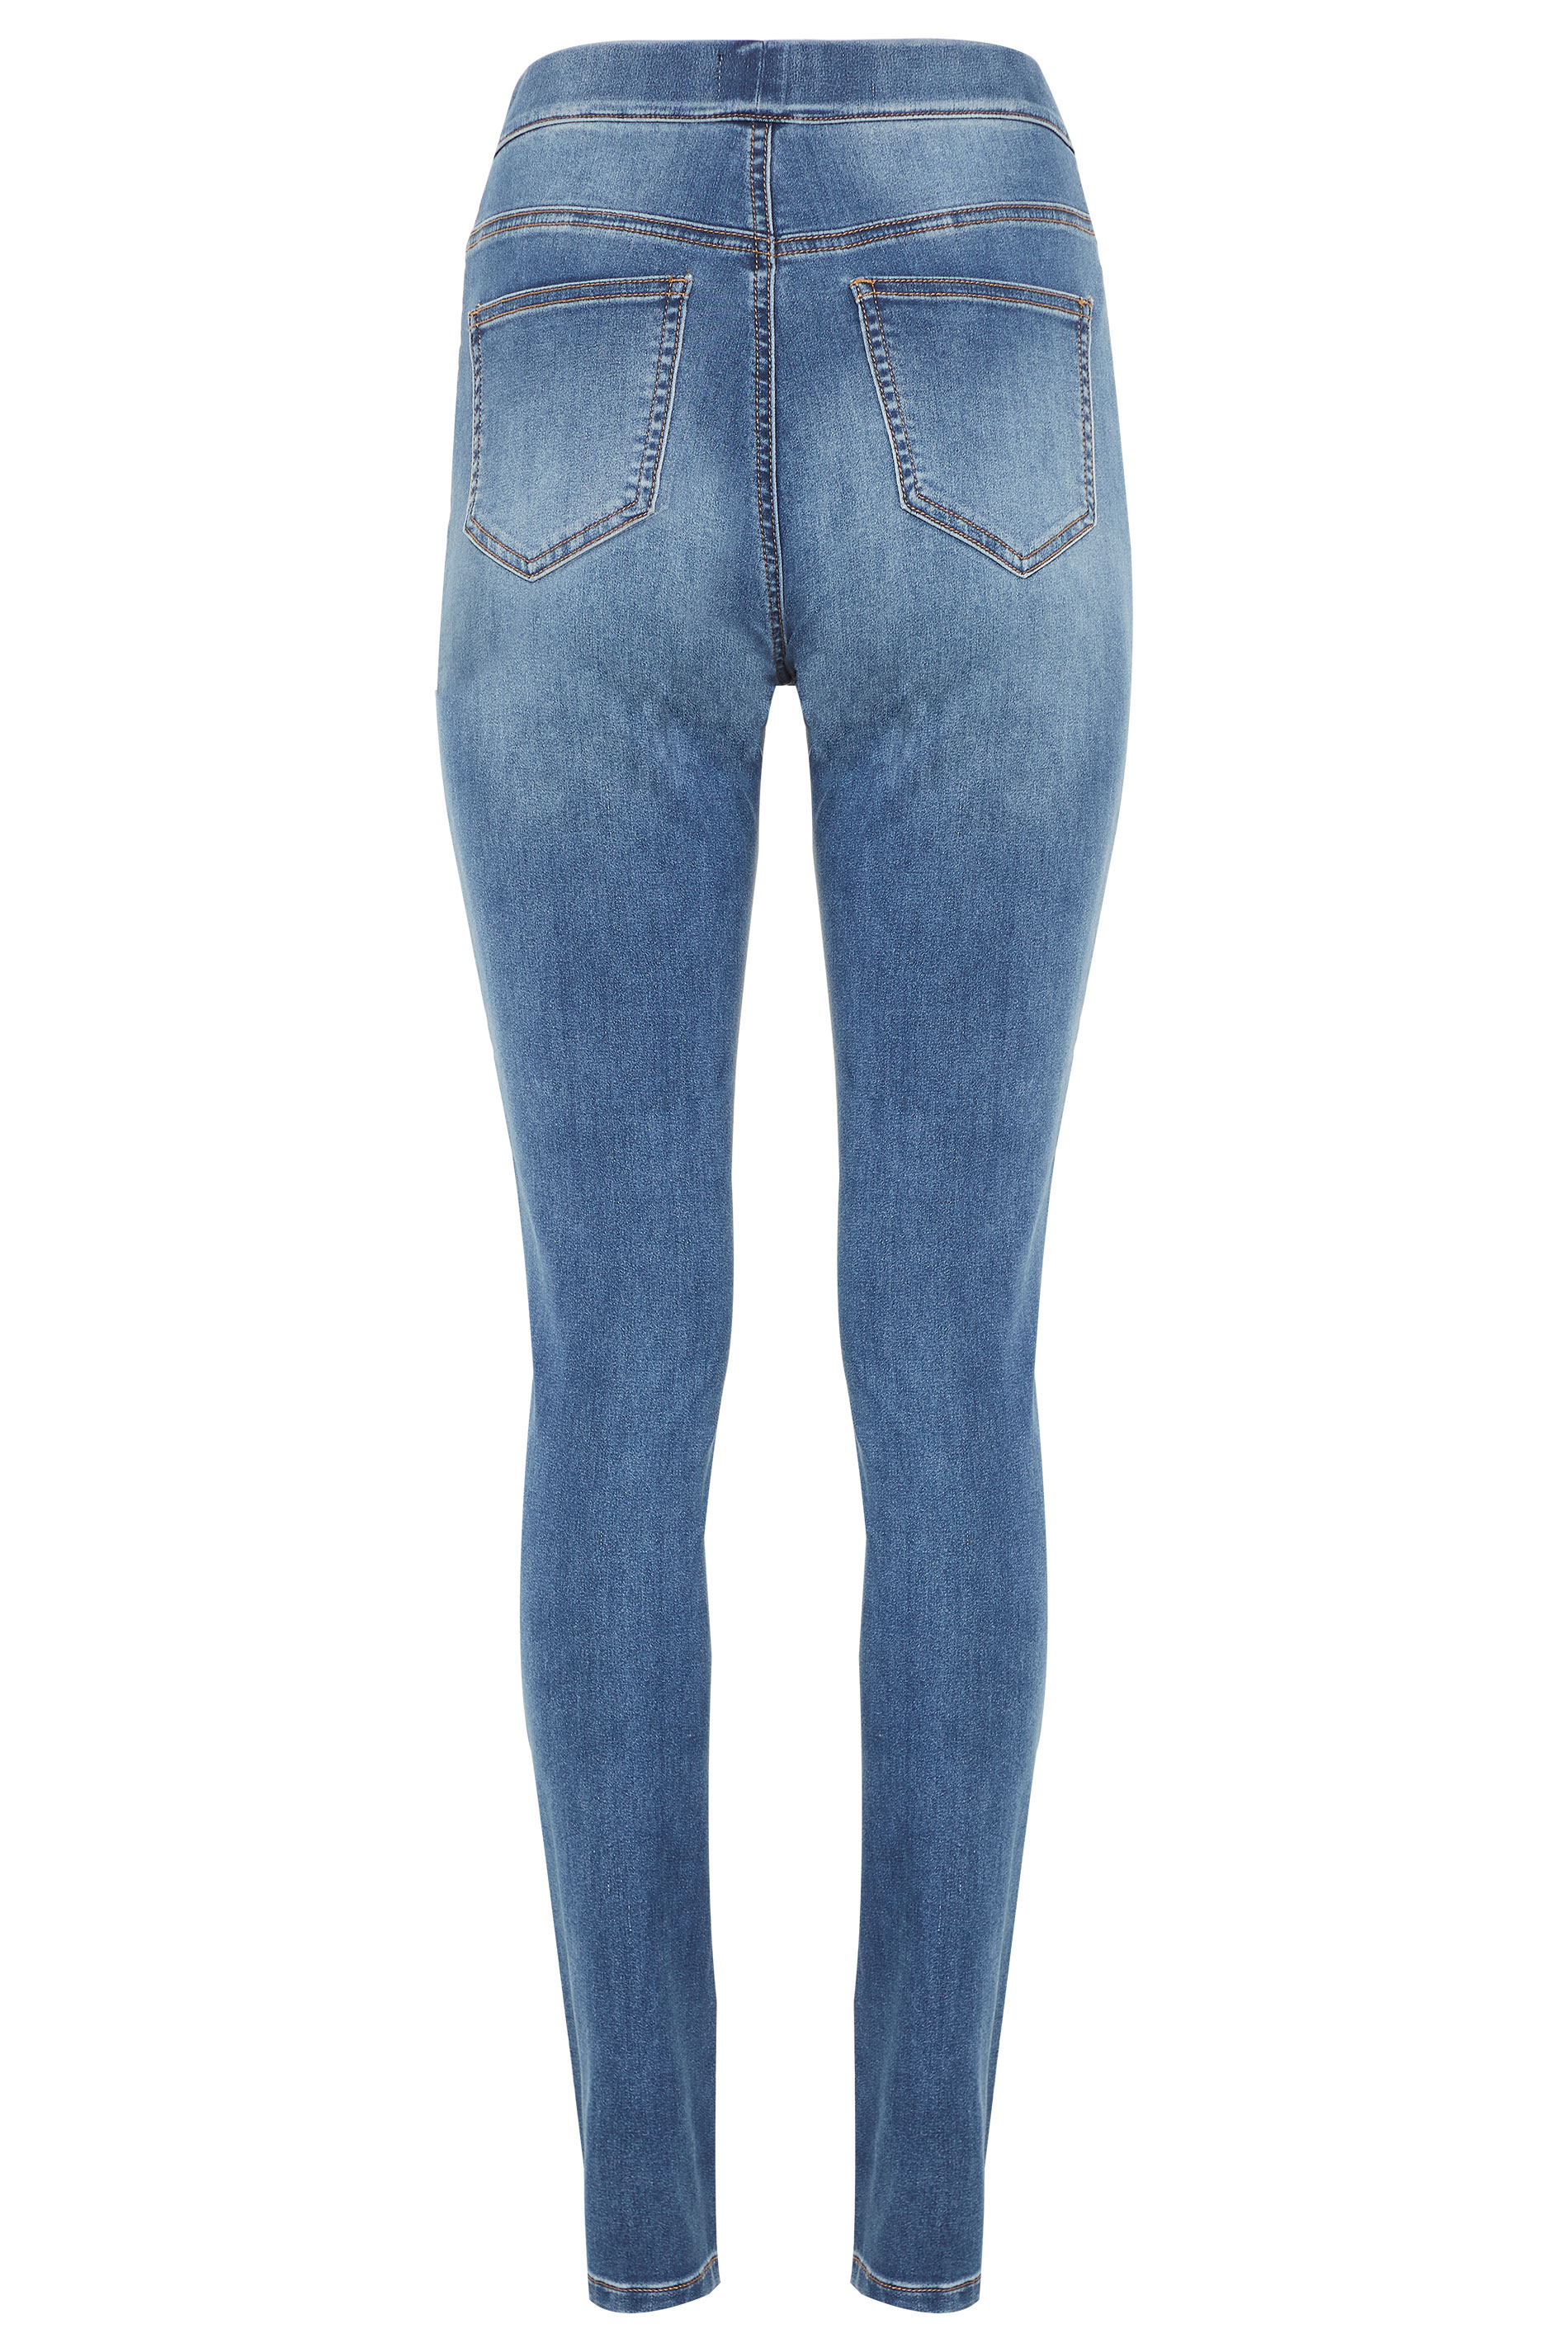 LTS MADE FOR GOOD Washed Blue Denim Jeggings | Long Tall Sally